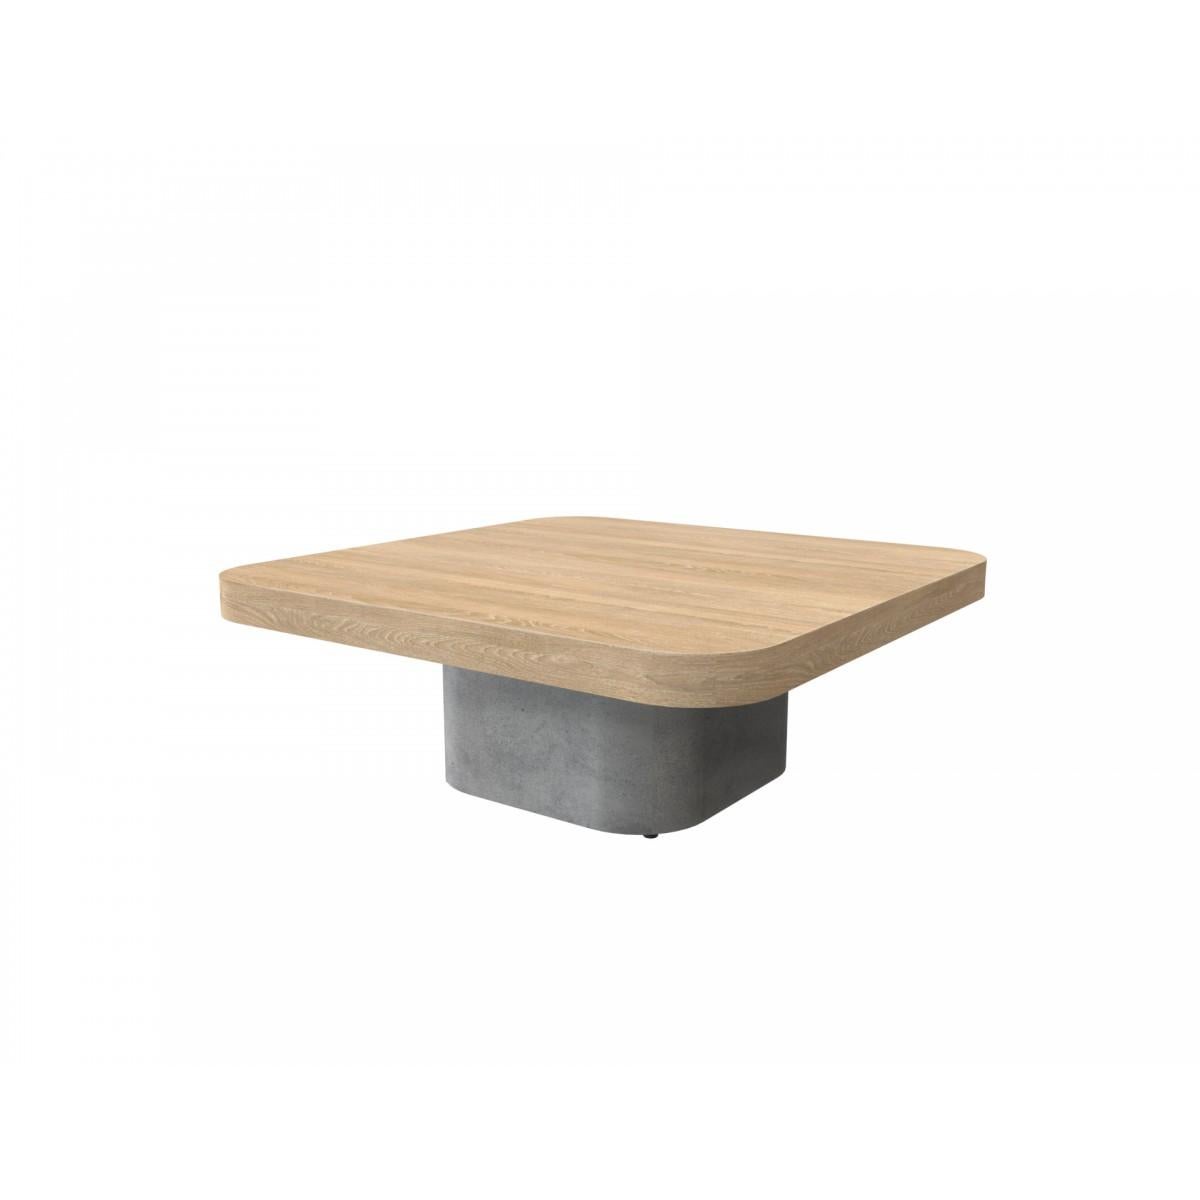 Beautiful combination of wood and concrete for this coffee table with a midcentury style and a resolutely modern look. Graphic, design, subtle!